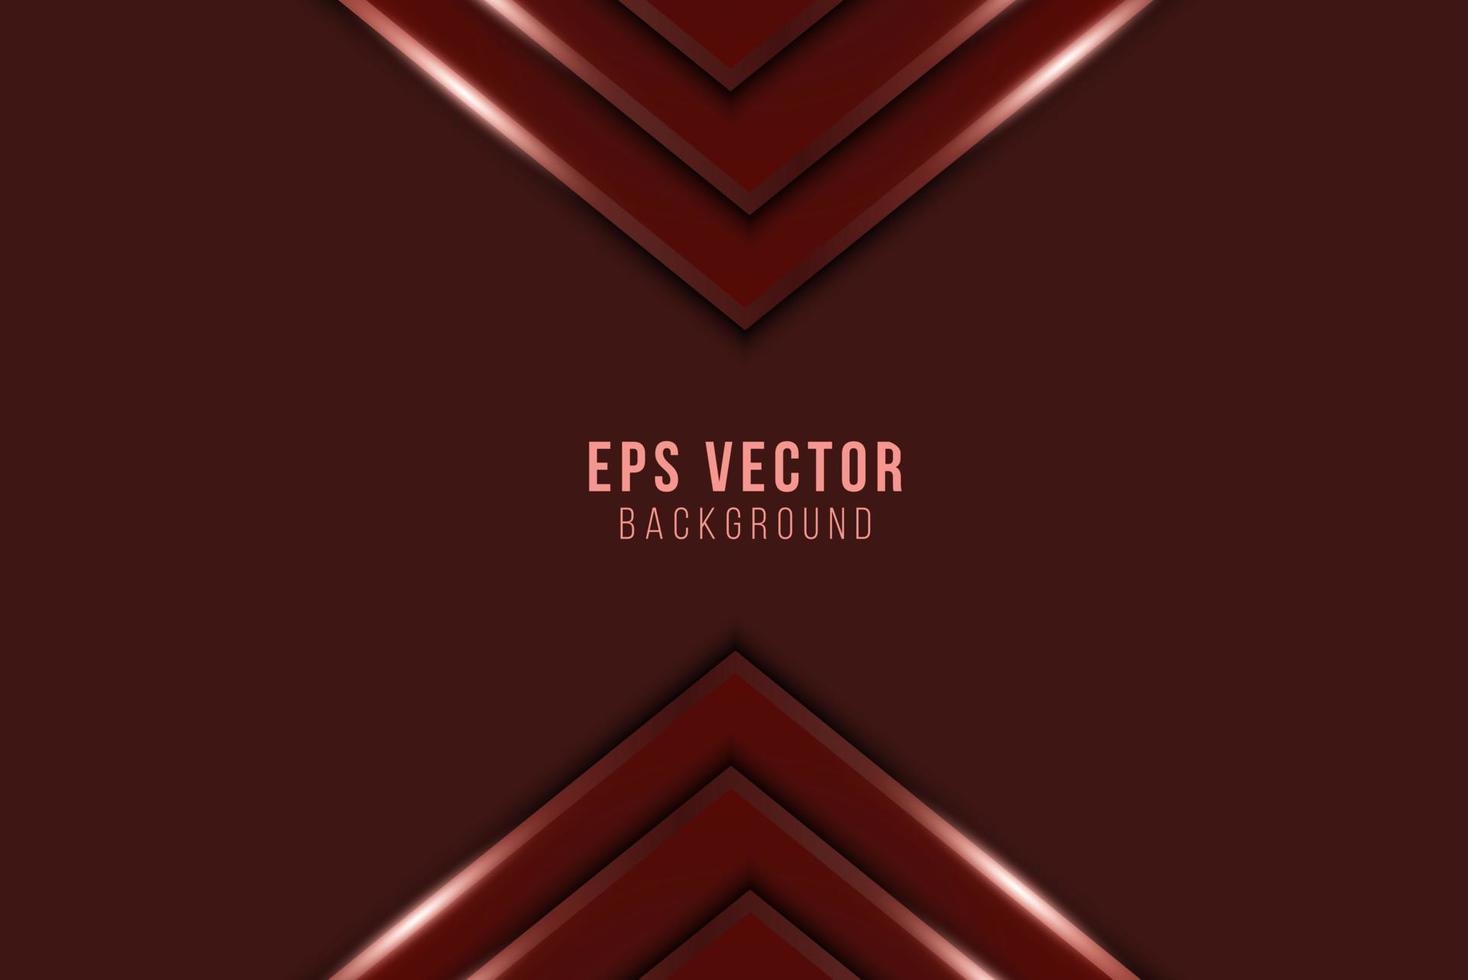 Dark red abstract luxury shapes overlapping on dark red background. Template premium award design. Vector illustration